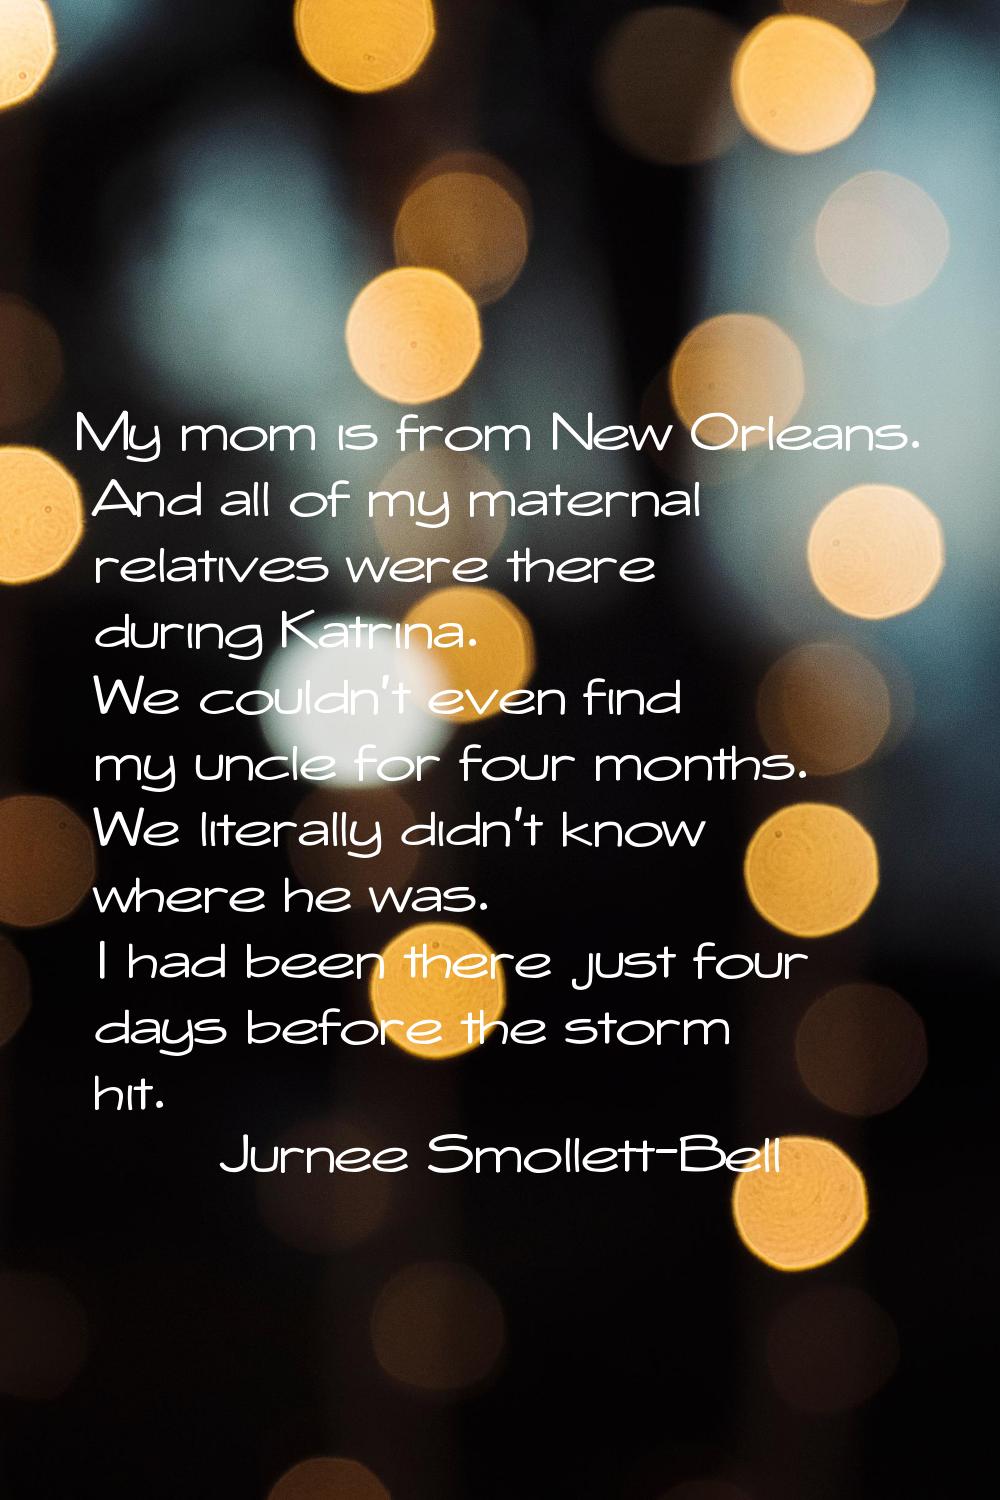 My mom is from New Orleans. And all of my maternal relatives were there during Katrina. We couldn't